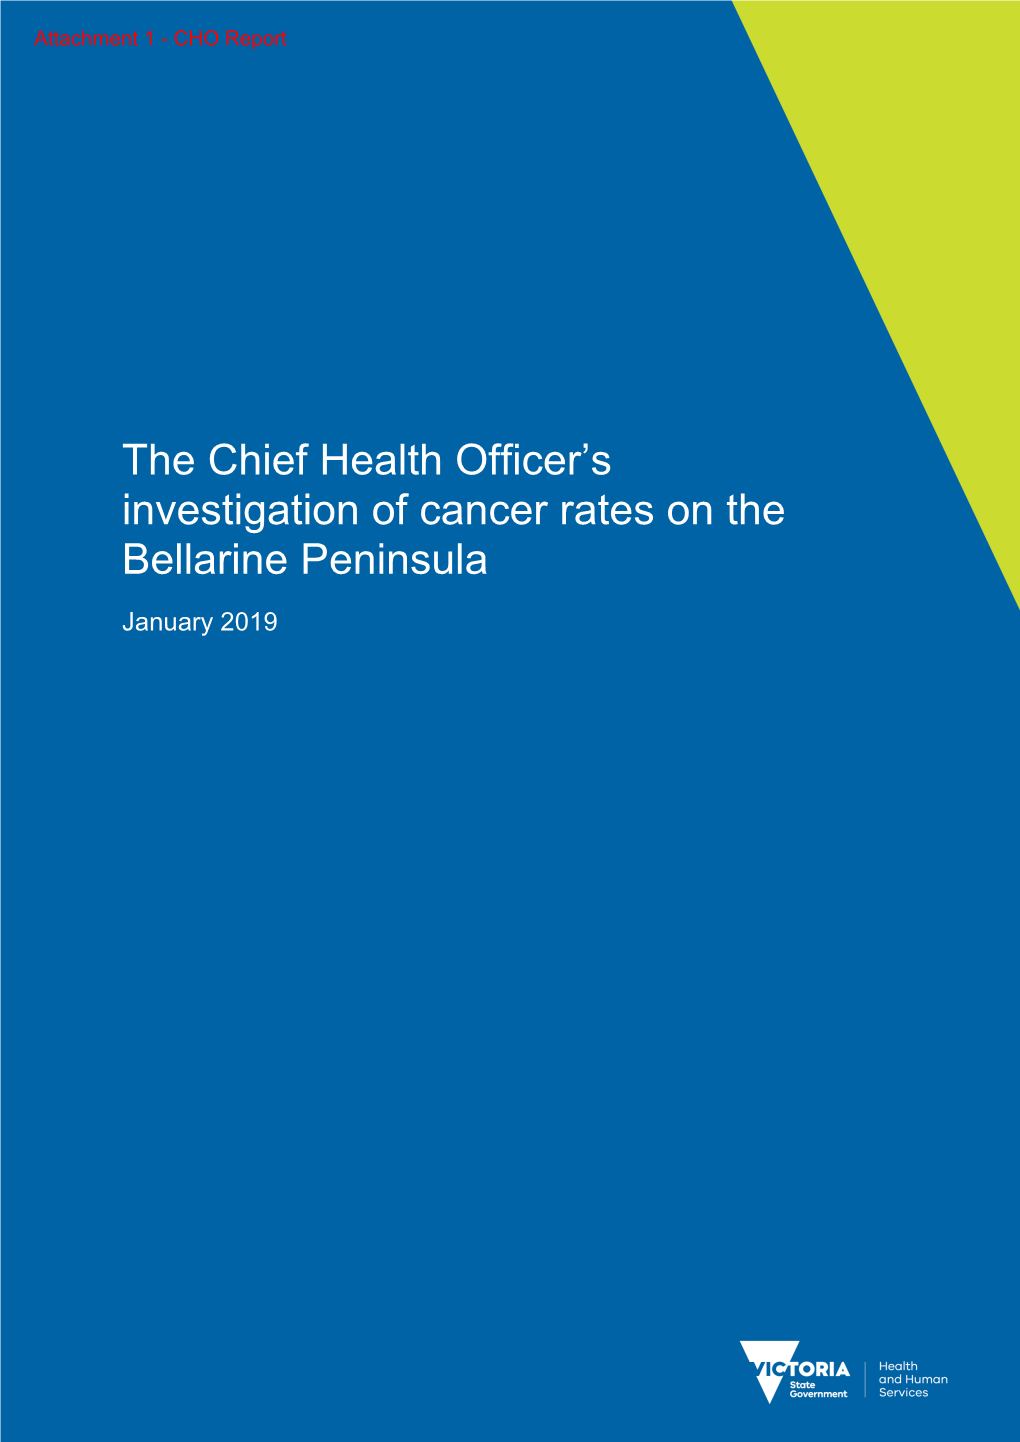 The Chief Health Officer's Investigation of Cancer Rates on The